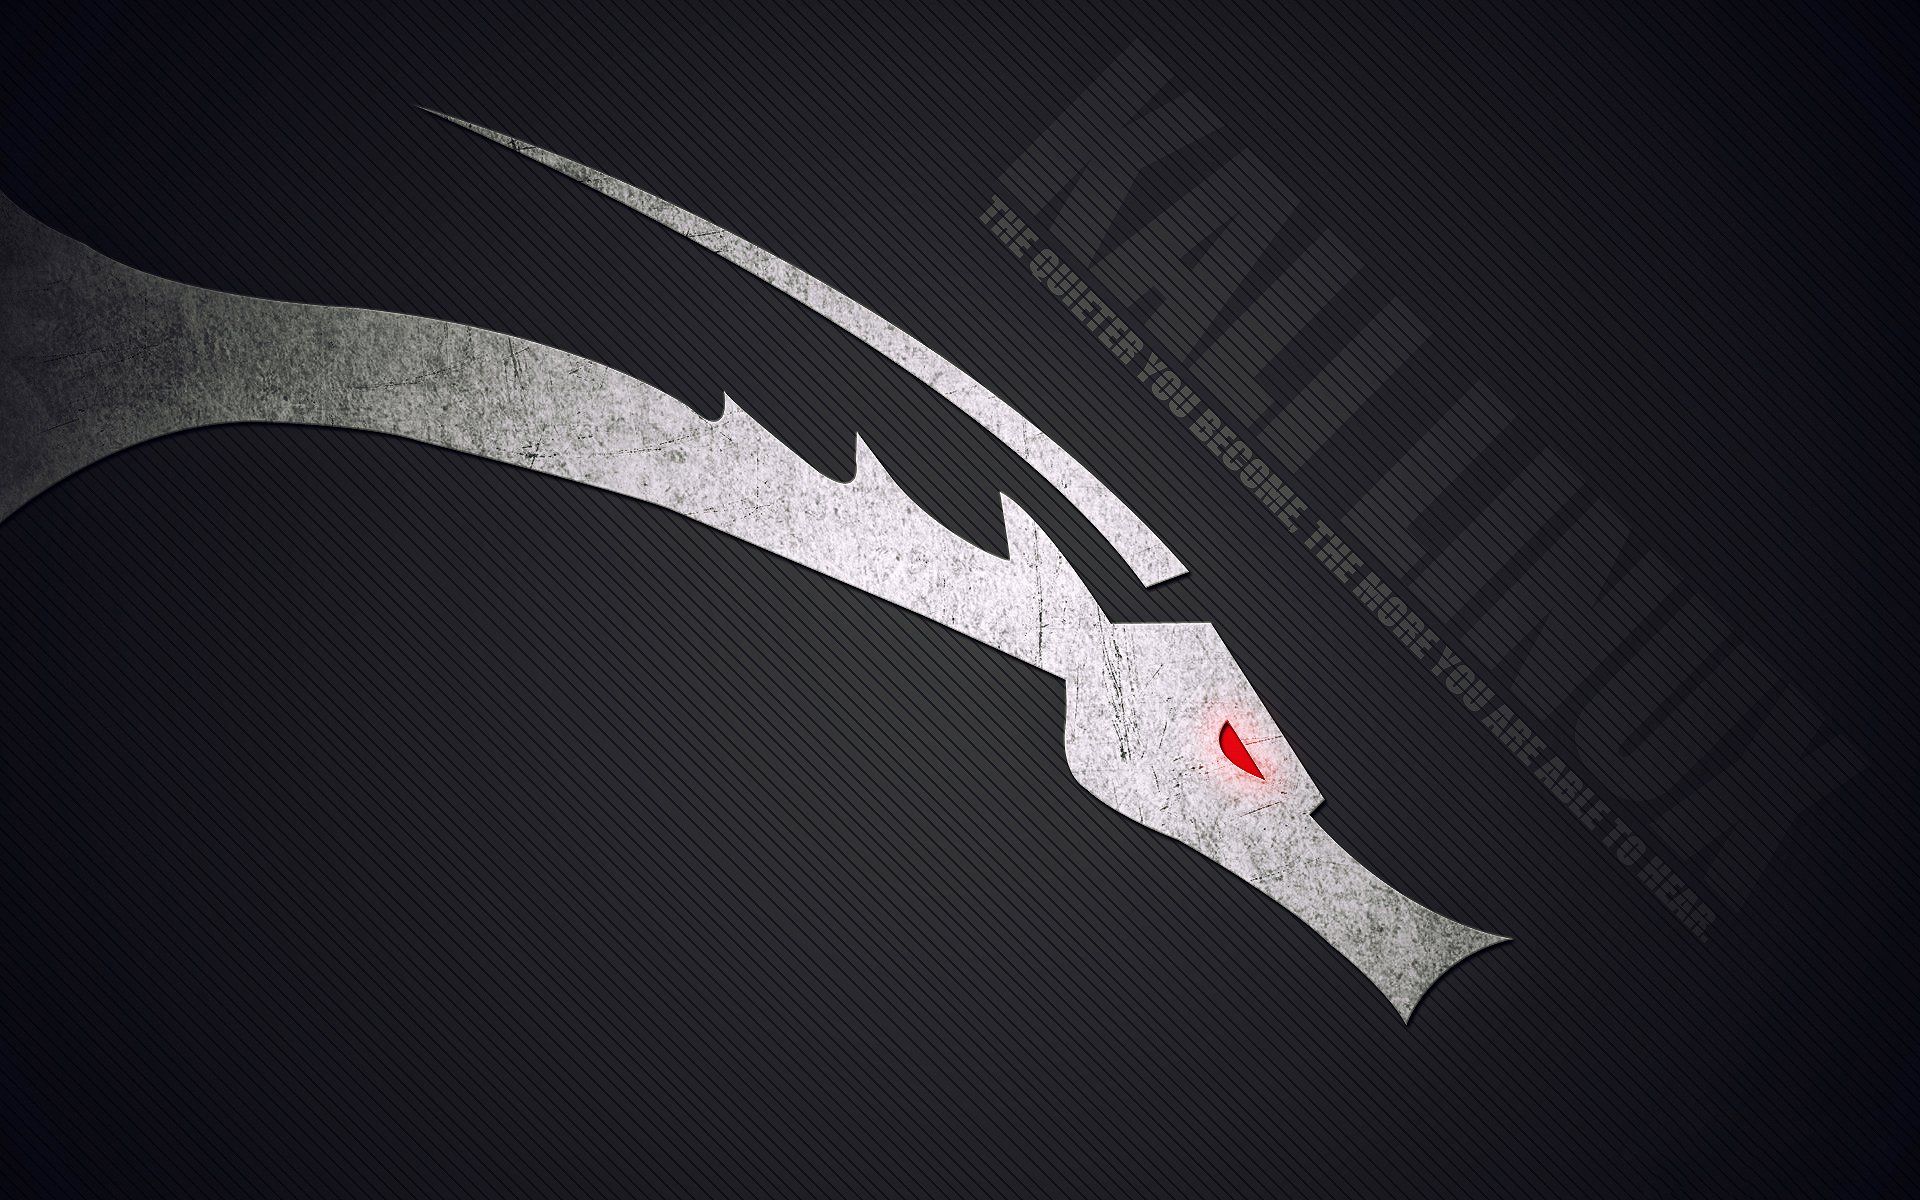 Kali Linux Wallpapers The Linux Terminal Linux tutorials